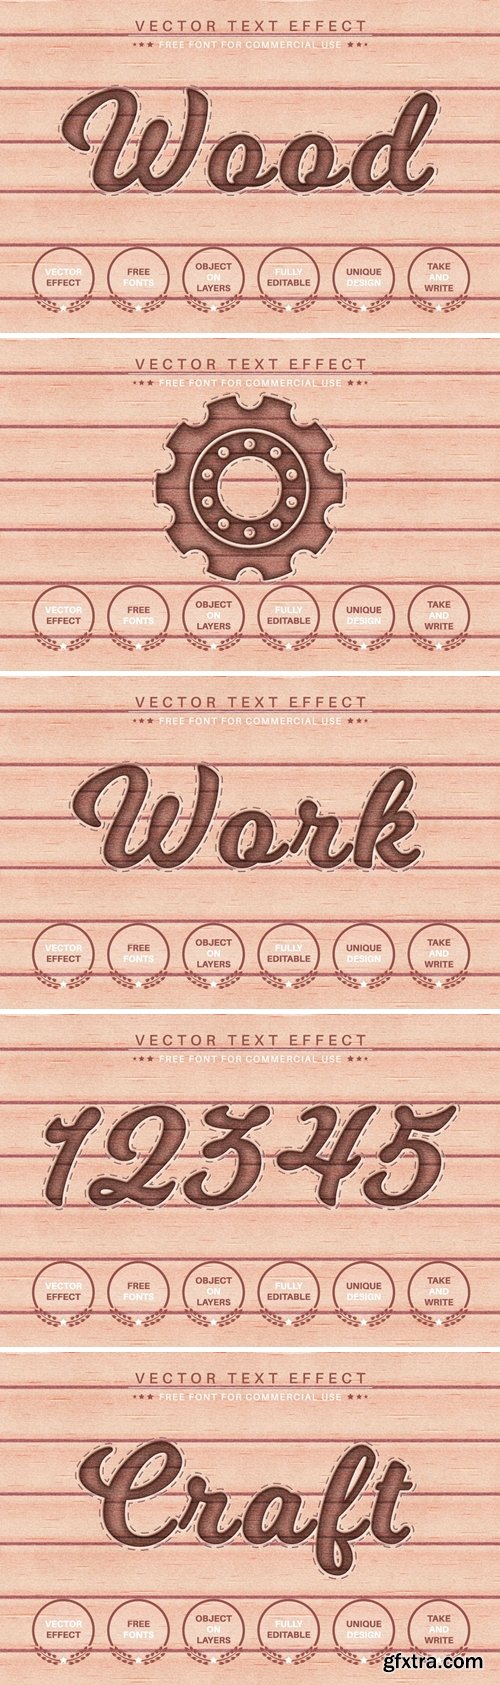 Wooden Craft - Editable Text Effect, Font Style